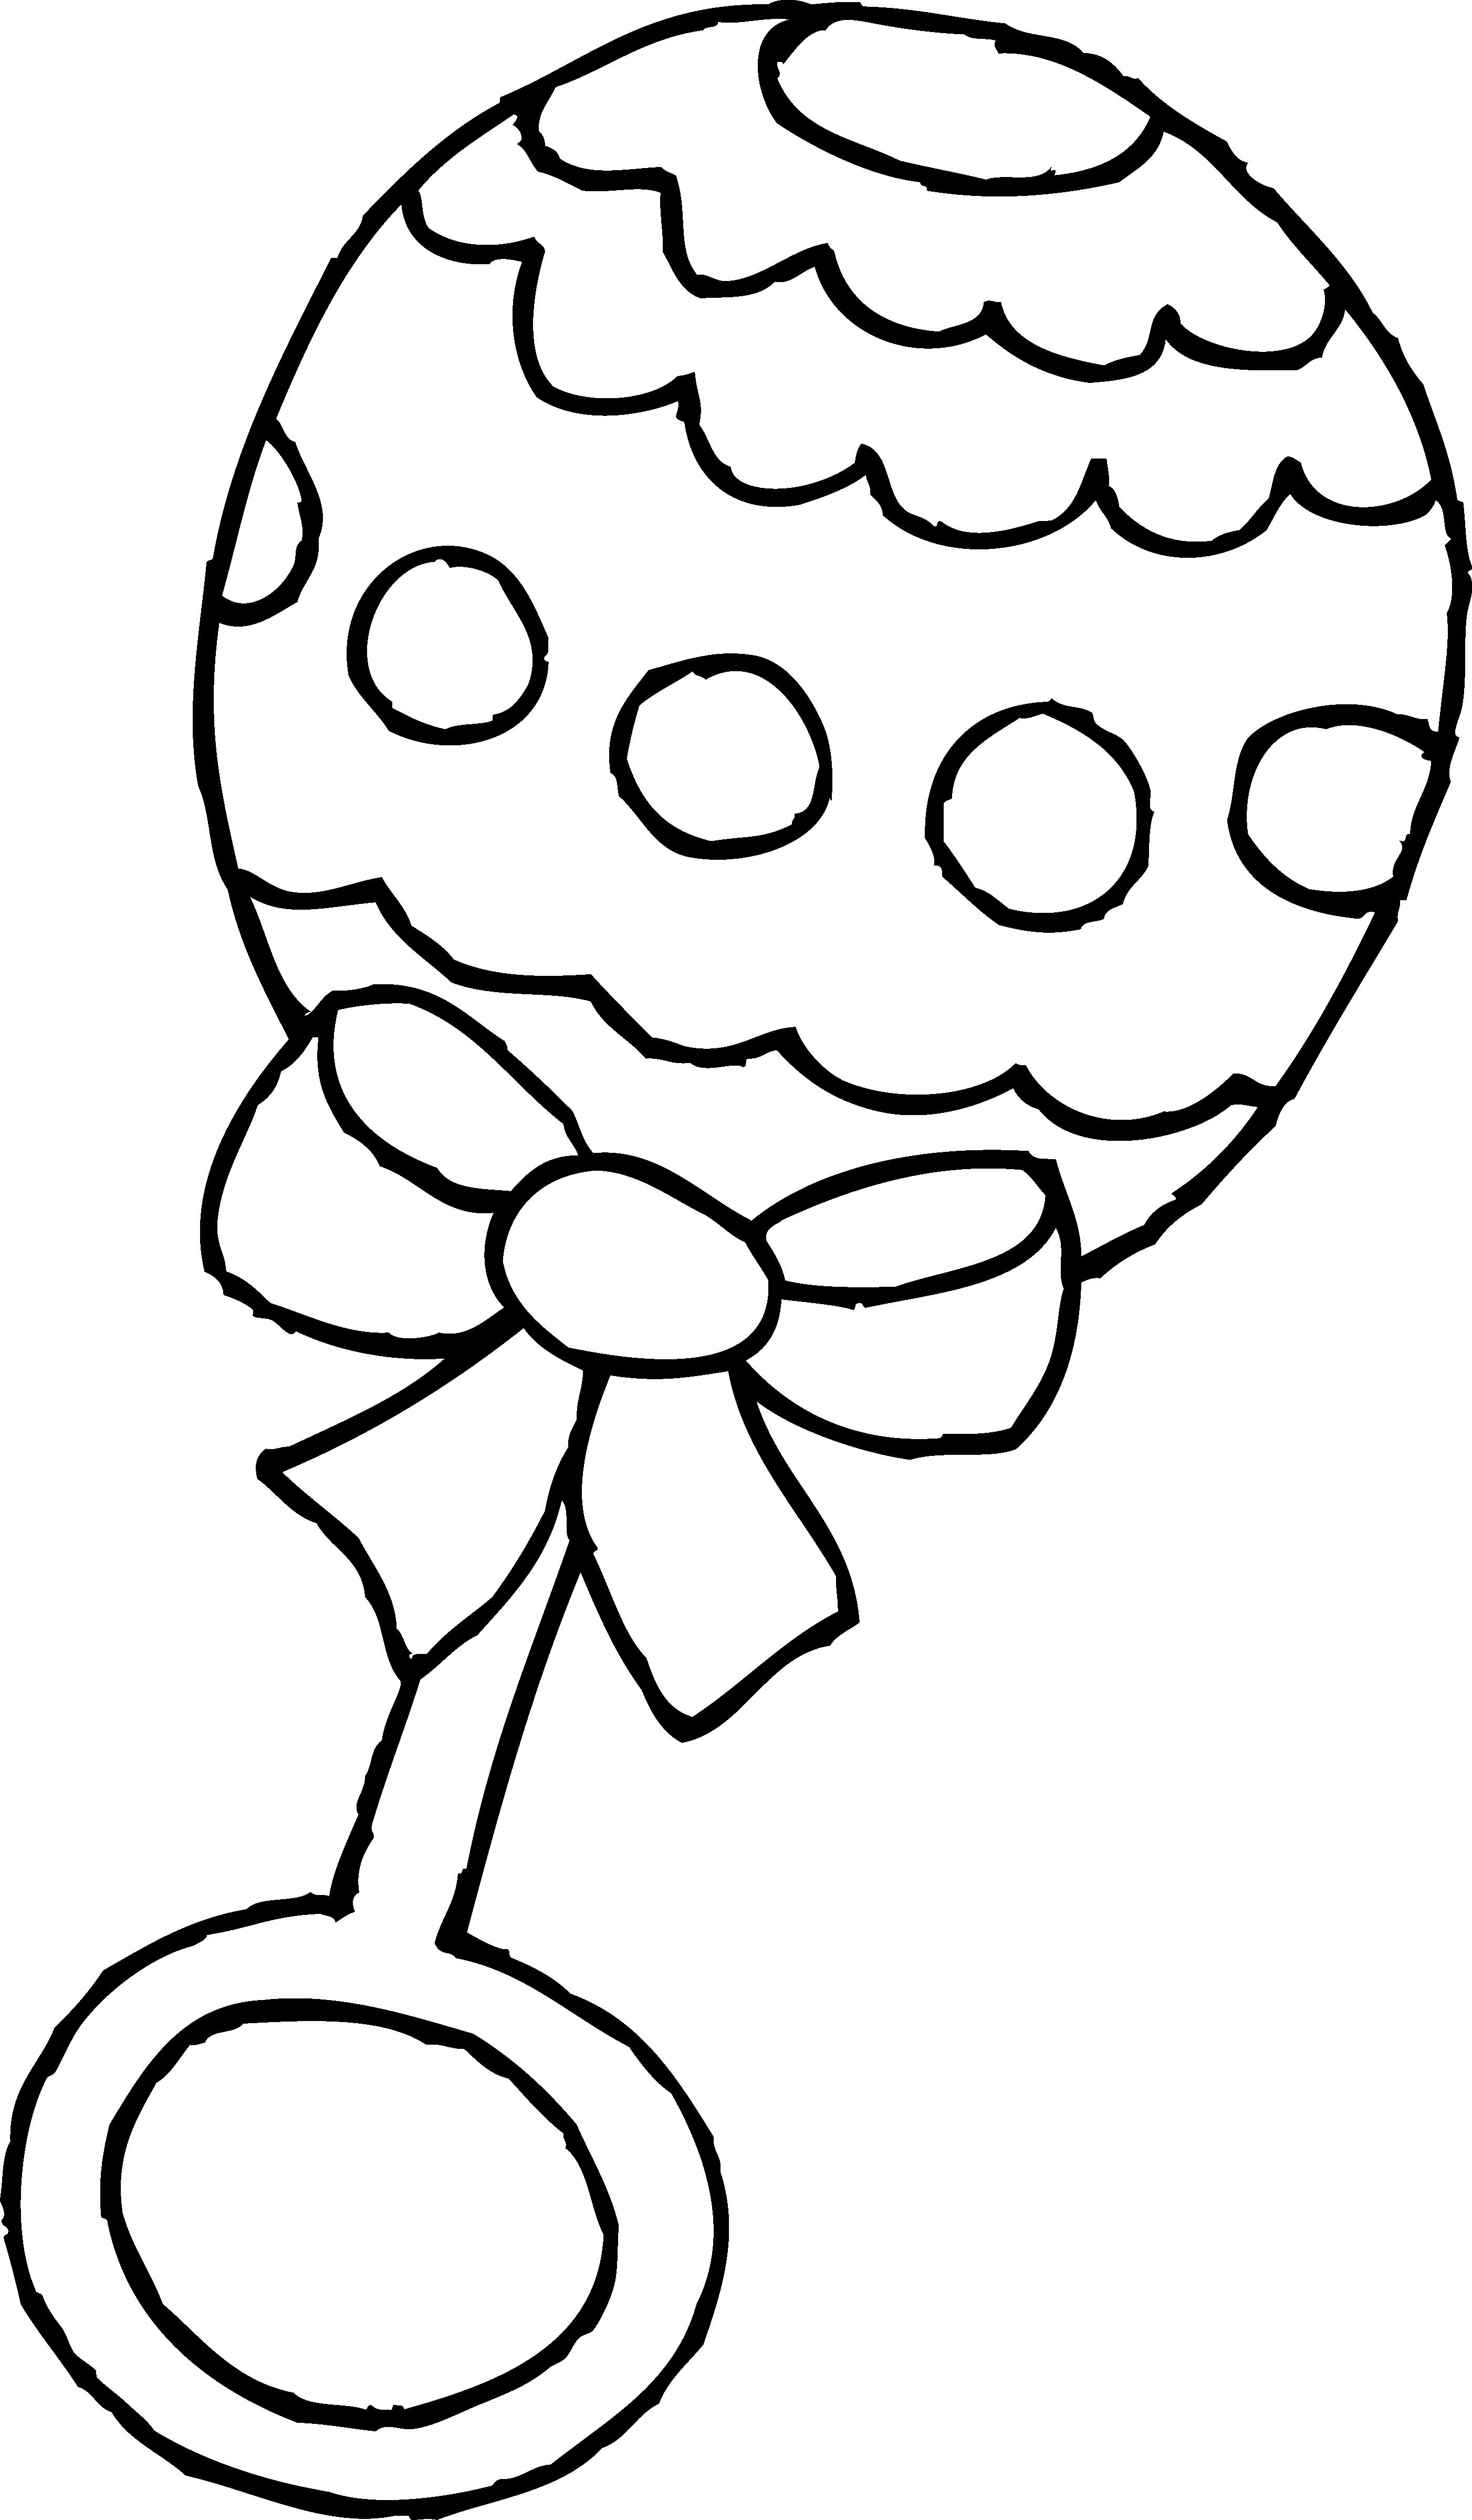 Plant clipart draw. Baby shower drawing at